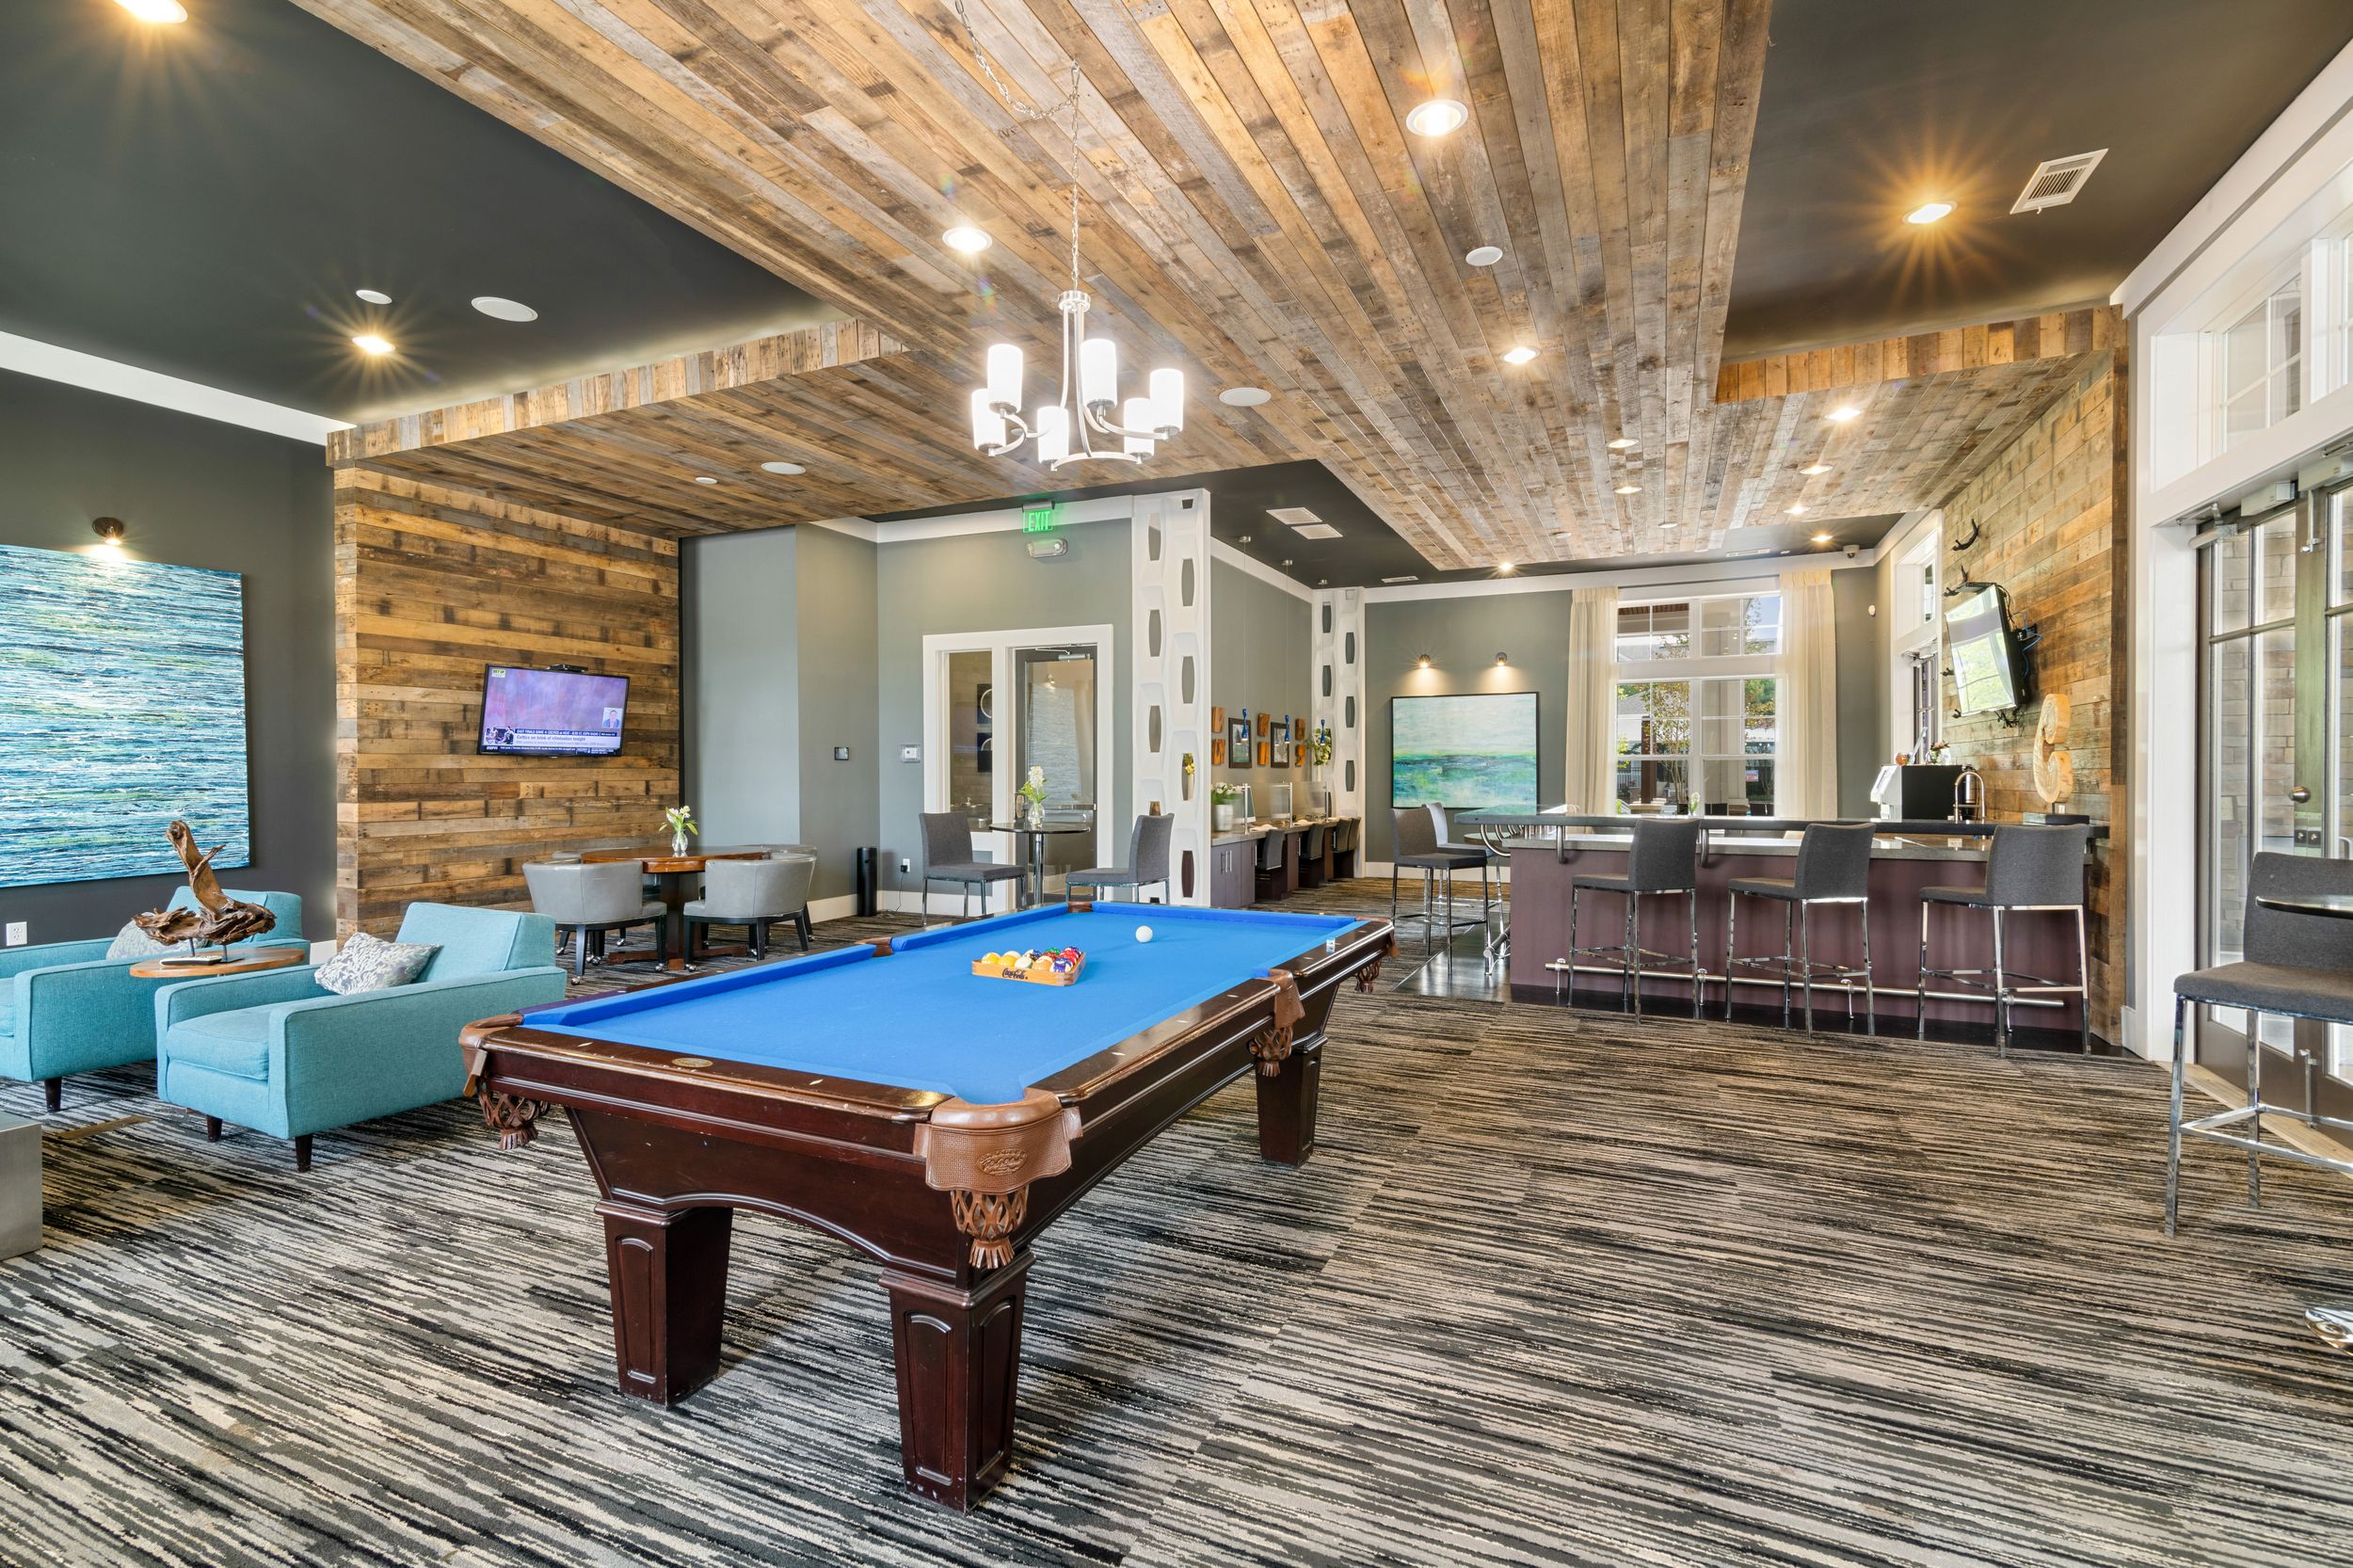 Resident game room with Billiards with wooden floors and stylish turquoise furniture at Patterson Place Apartments.